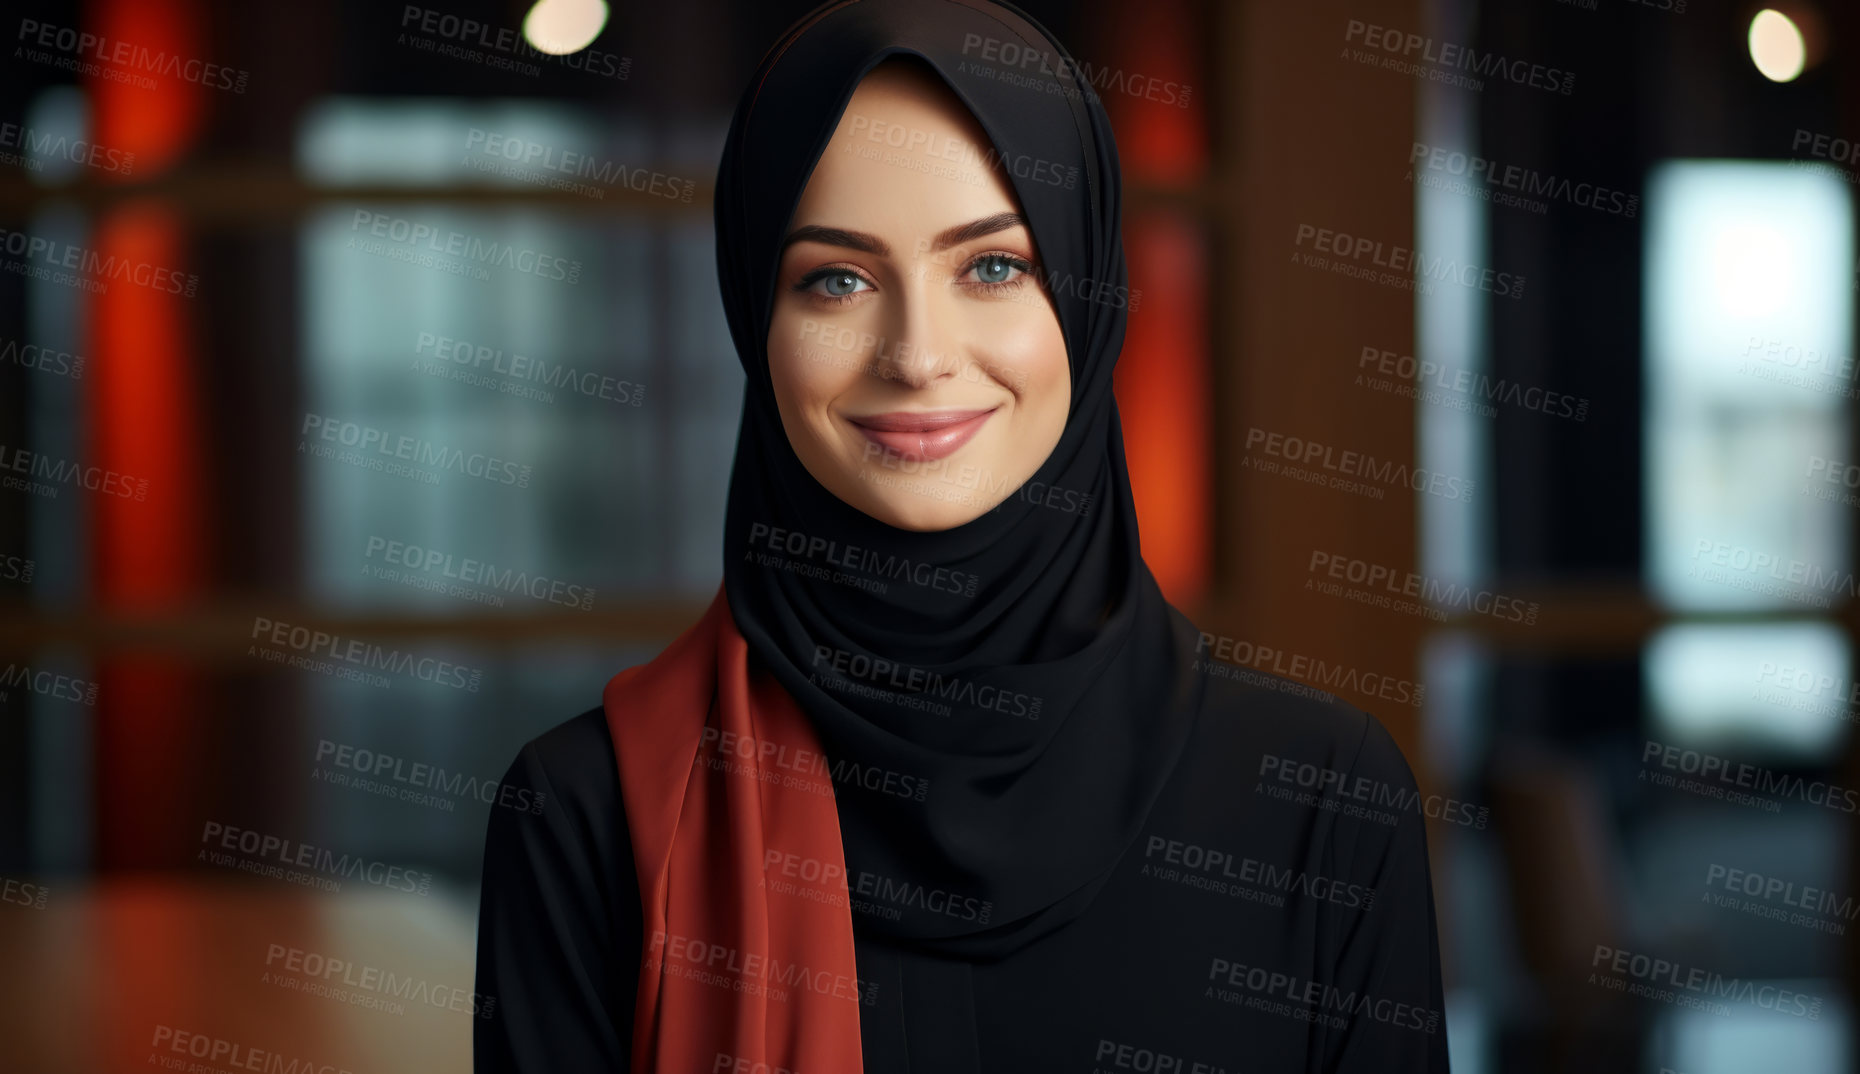 Buy stock photo Portrait of muslim woman smiling. Wearing black hijab.Religion concept.